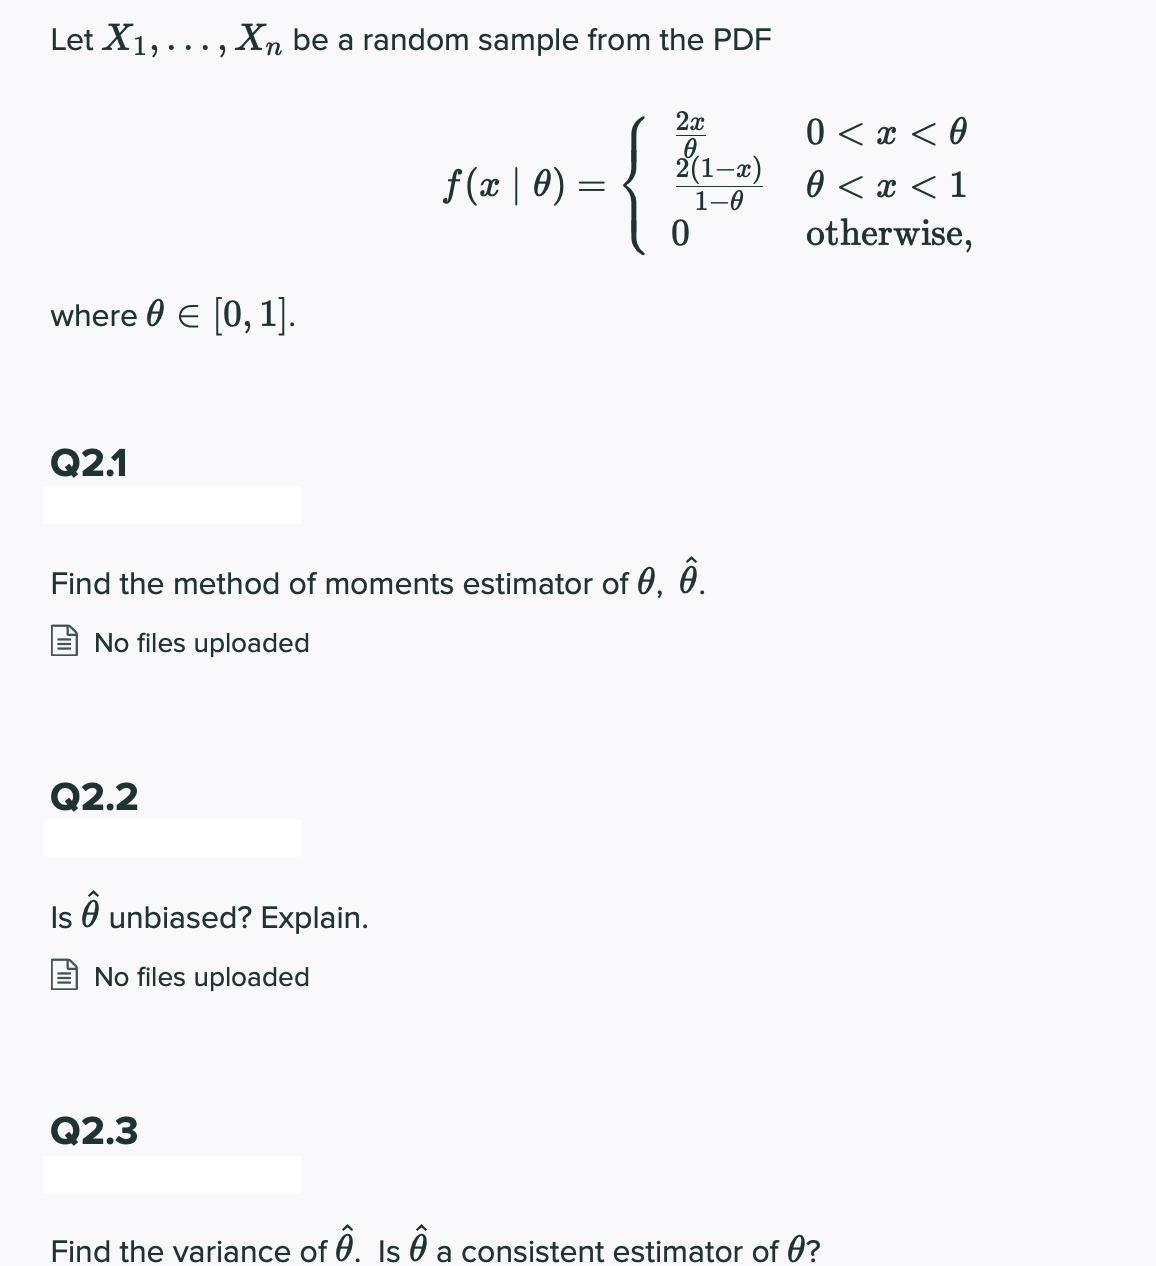 Let X1, ... , Xn be a random sample from the PDF
2x
0 < x < 0
0 < x < 1
otherwise,
f(x | 0) =
2(1-x)
1-0
where 0 E [0, 1].
Q2.1
Find the method of moments estimator of 0, 0.
No files uploaded
Q2.2
Is O unbiased? Explain.
No files uploaded
Q2.3
Find the variance of 0. Is O a consistent estimator of 0?
